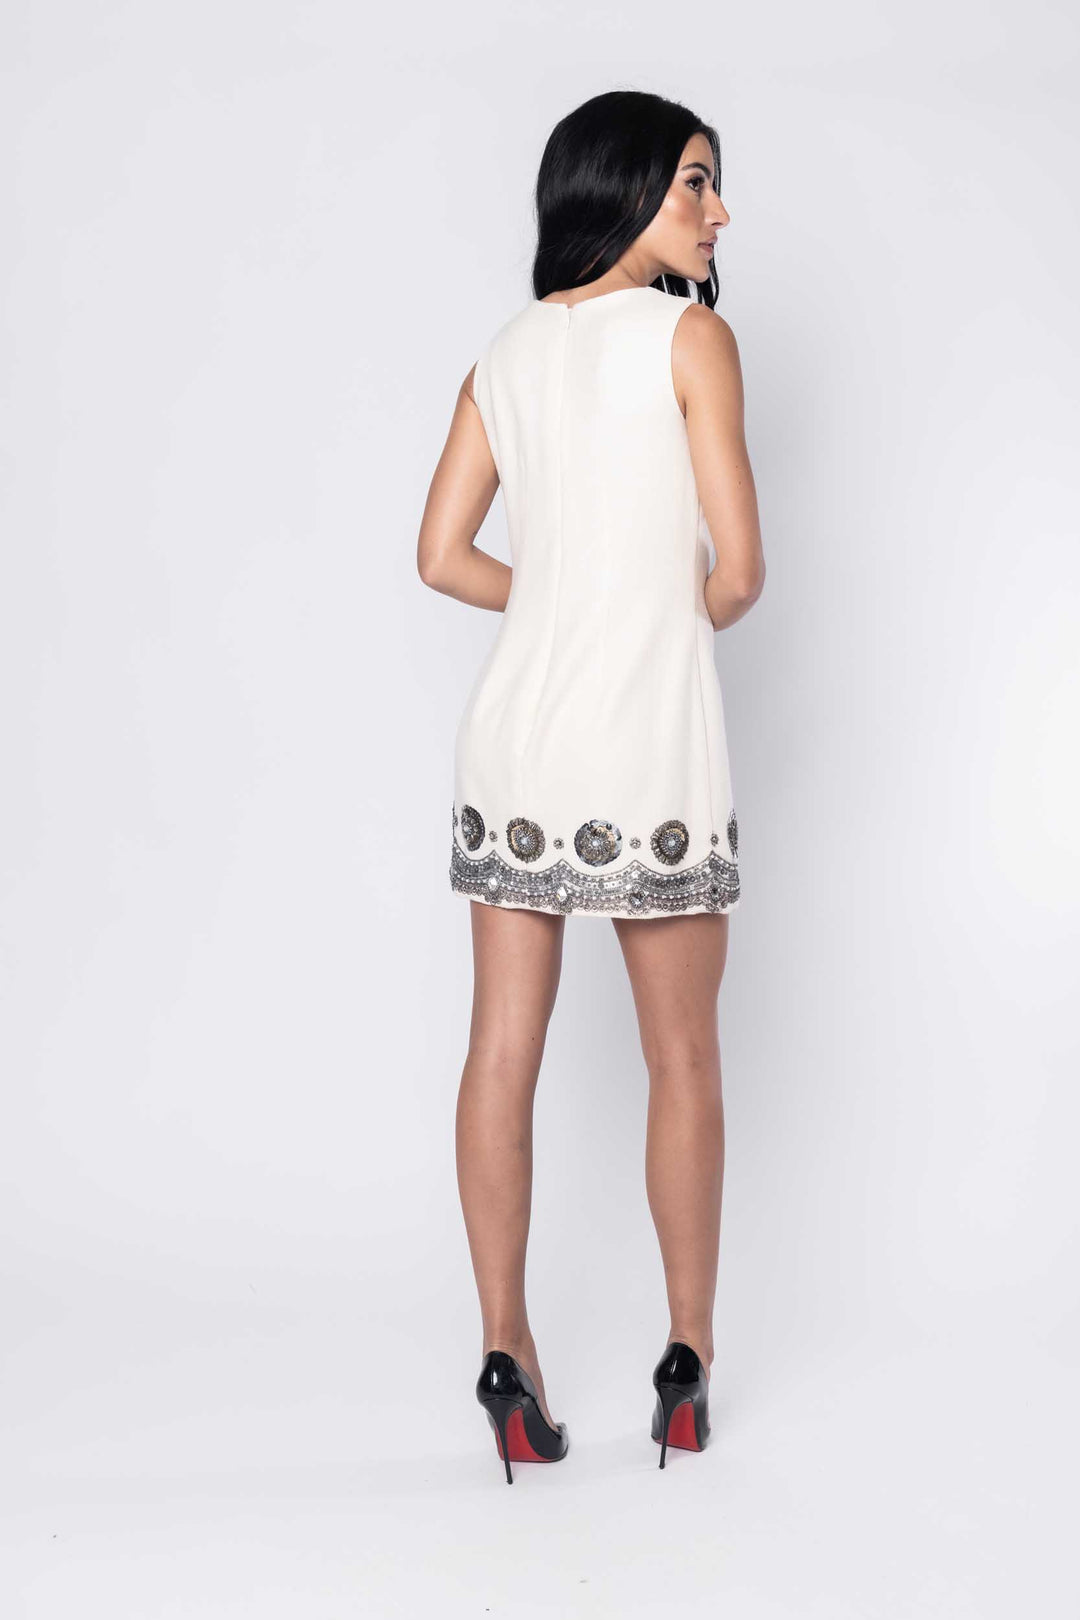 Beautiful model in white Sujata Gazder cocktail dress with decorative hem - back view